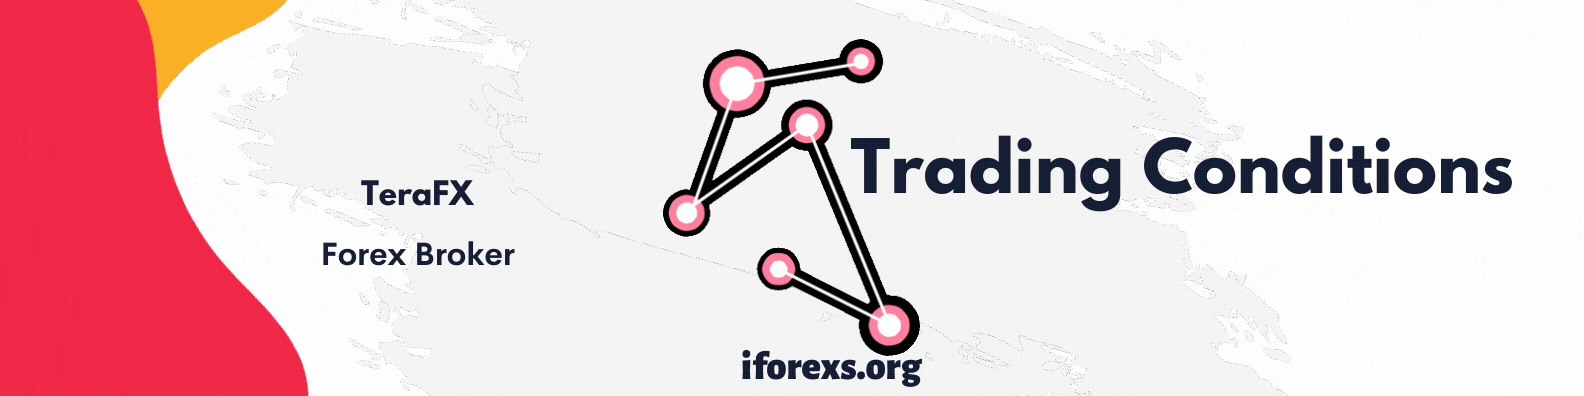 TeraFX Trading Conditions